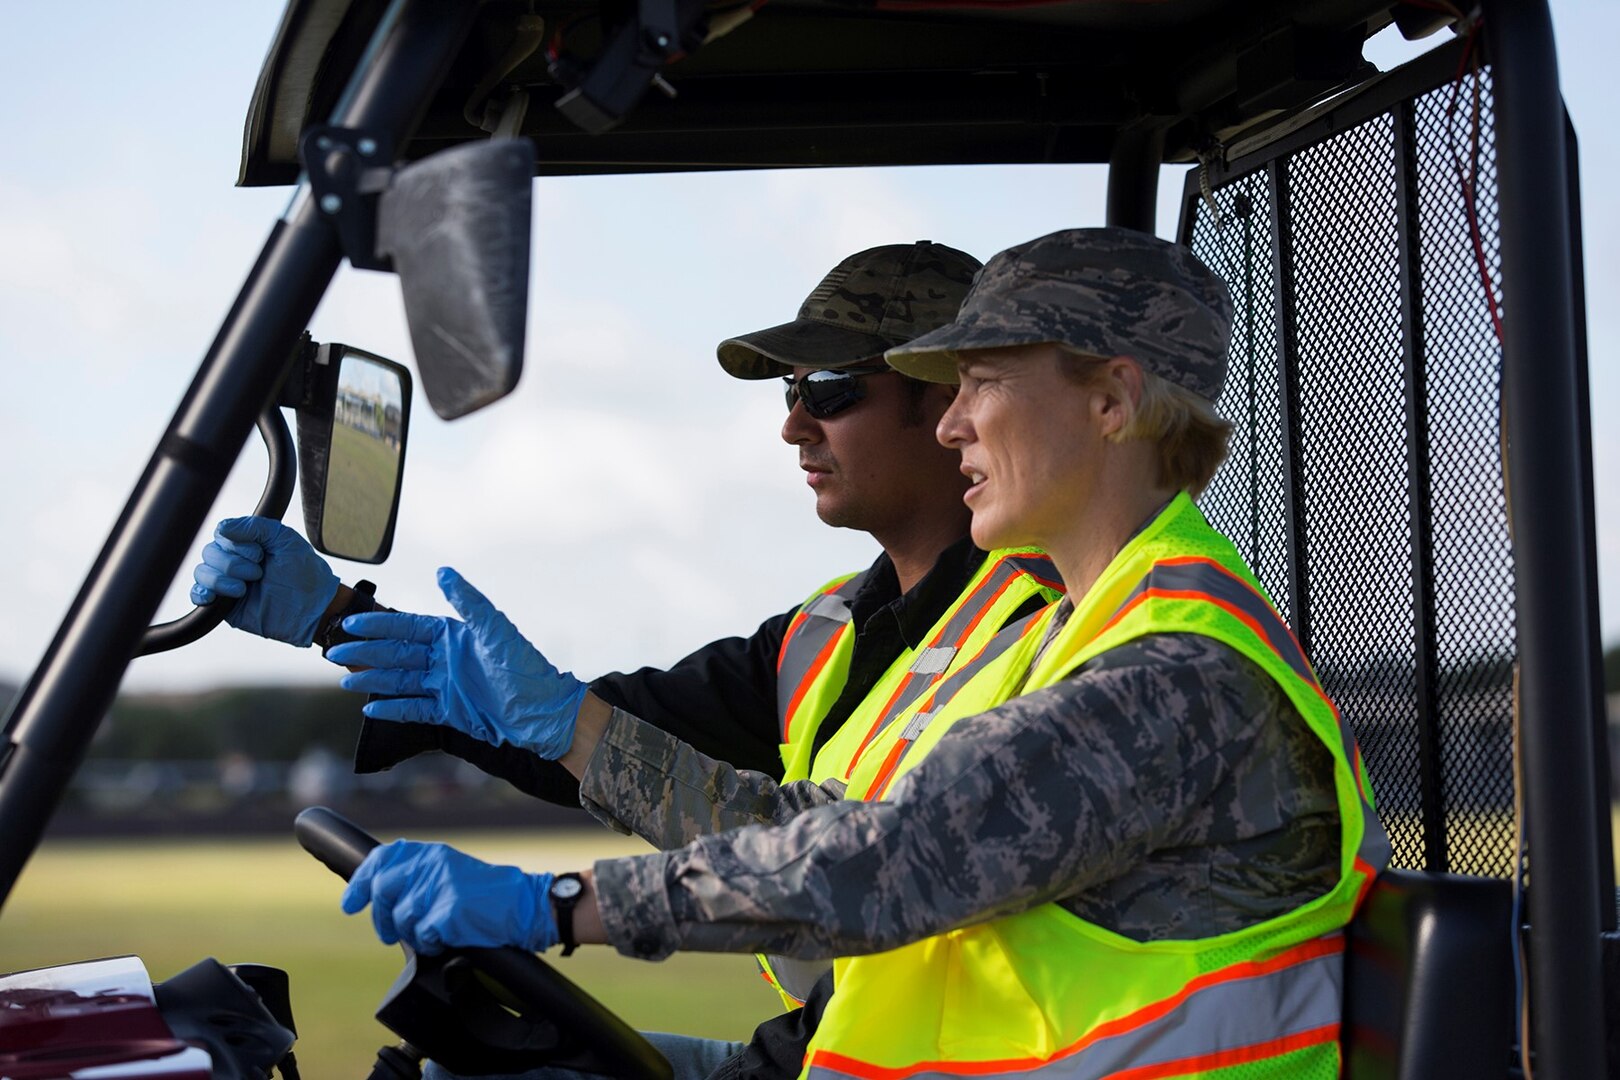 From right to left. Brig. Gen. Heather Pringle, 502nd Air Base Wing and Joint Base San Antonio commander, and Jorge Ortiz, 502nd Civil Engineer Squadron Pest Management pest control technician, spread ant bait on a parade field at JBSA-Lackland, Texas, July 20, 2017. Senior leadership from 502nd ABW and JBSA accompanied the 502nd CES Pest Management pest control technicians as they completed work orders and took measures to keep the insect and animal population in check throughout the installation.